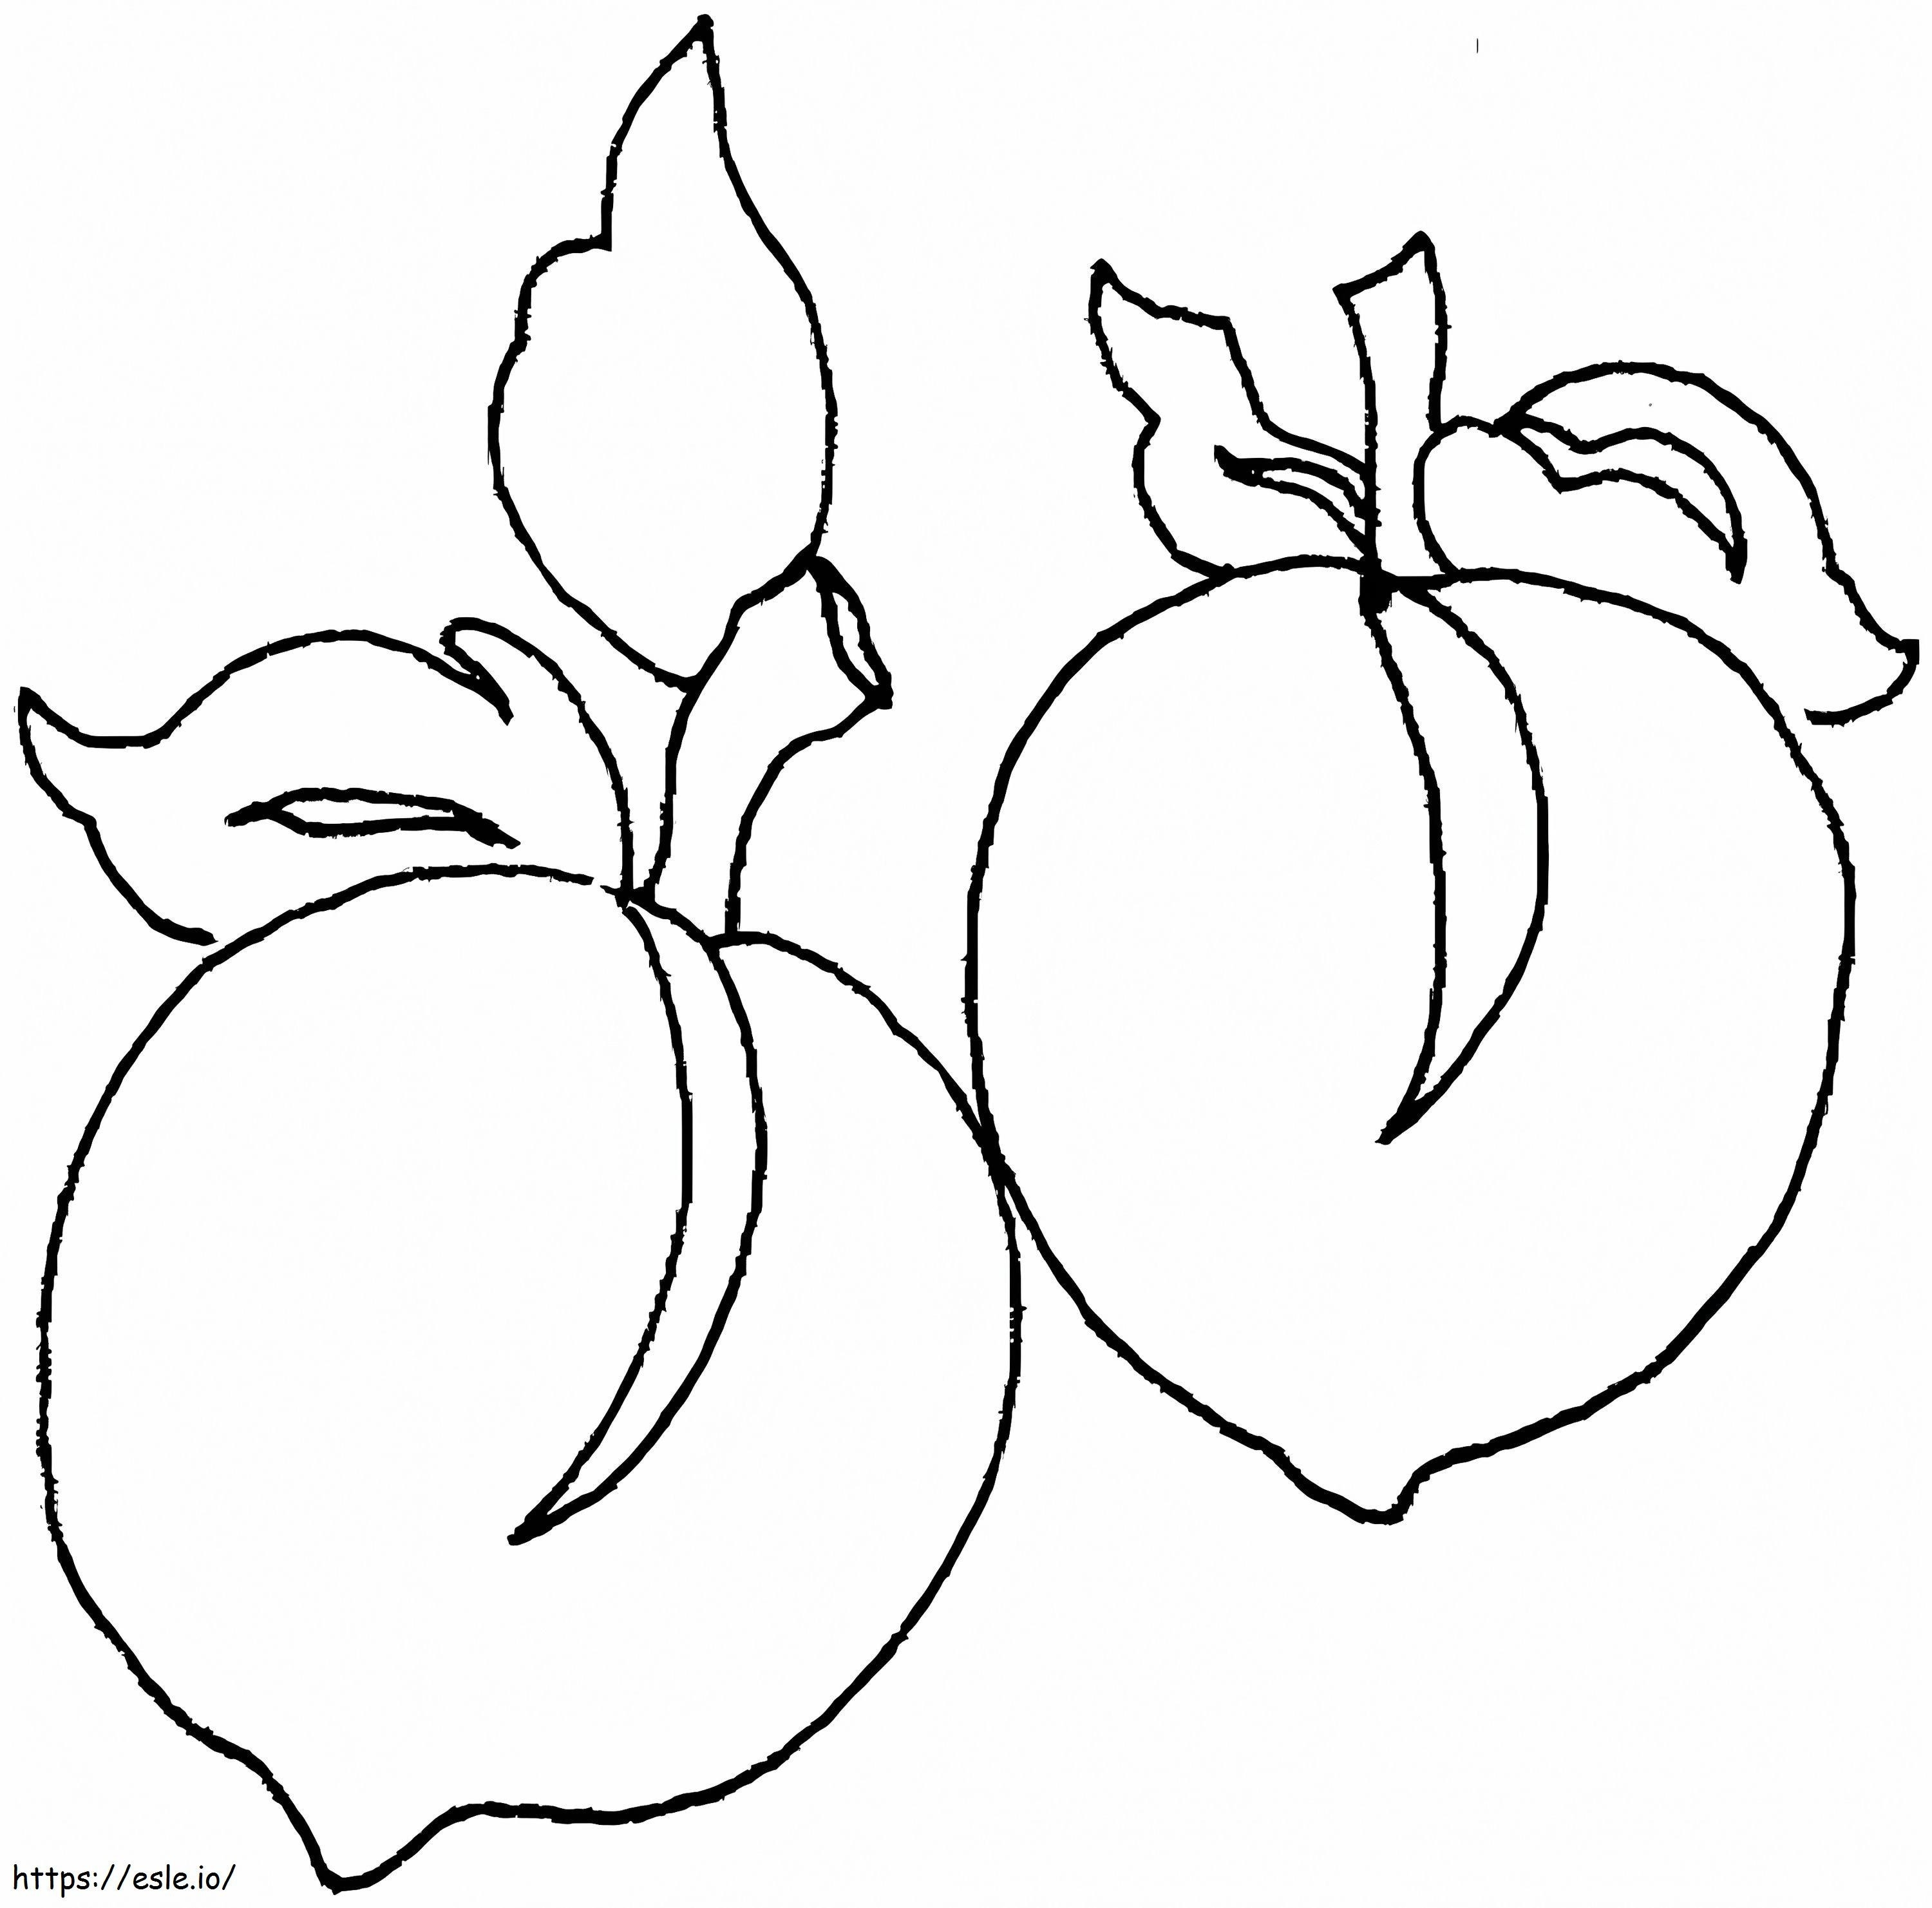 Two Peaches Fruits coloring page